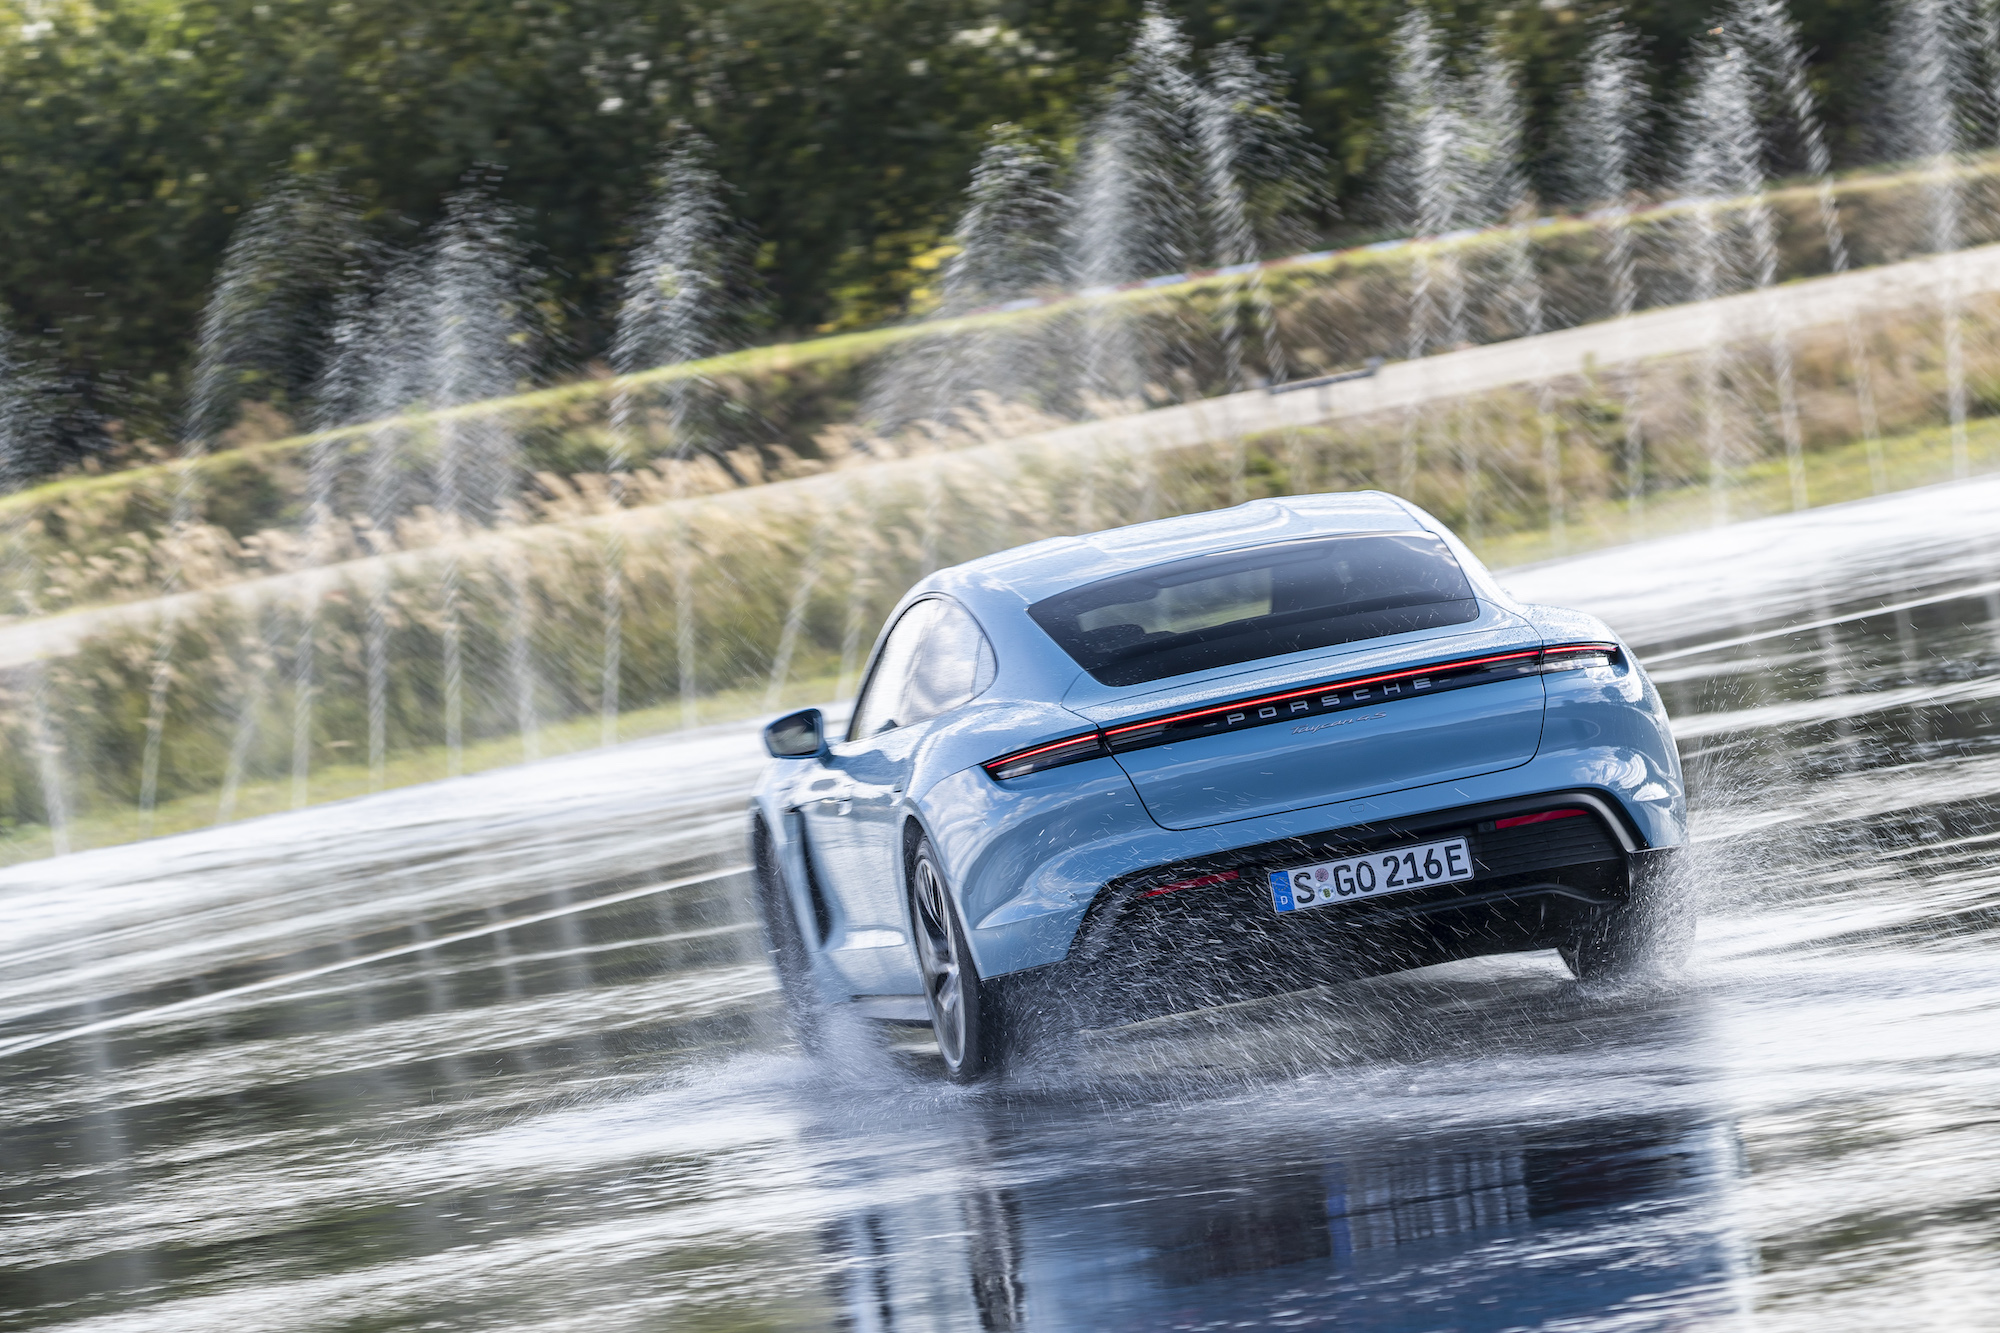 A sky-blue 2021 Porsche Taycan 4S maneuvers on wet pavement as water shoots into the air